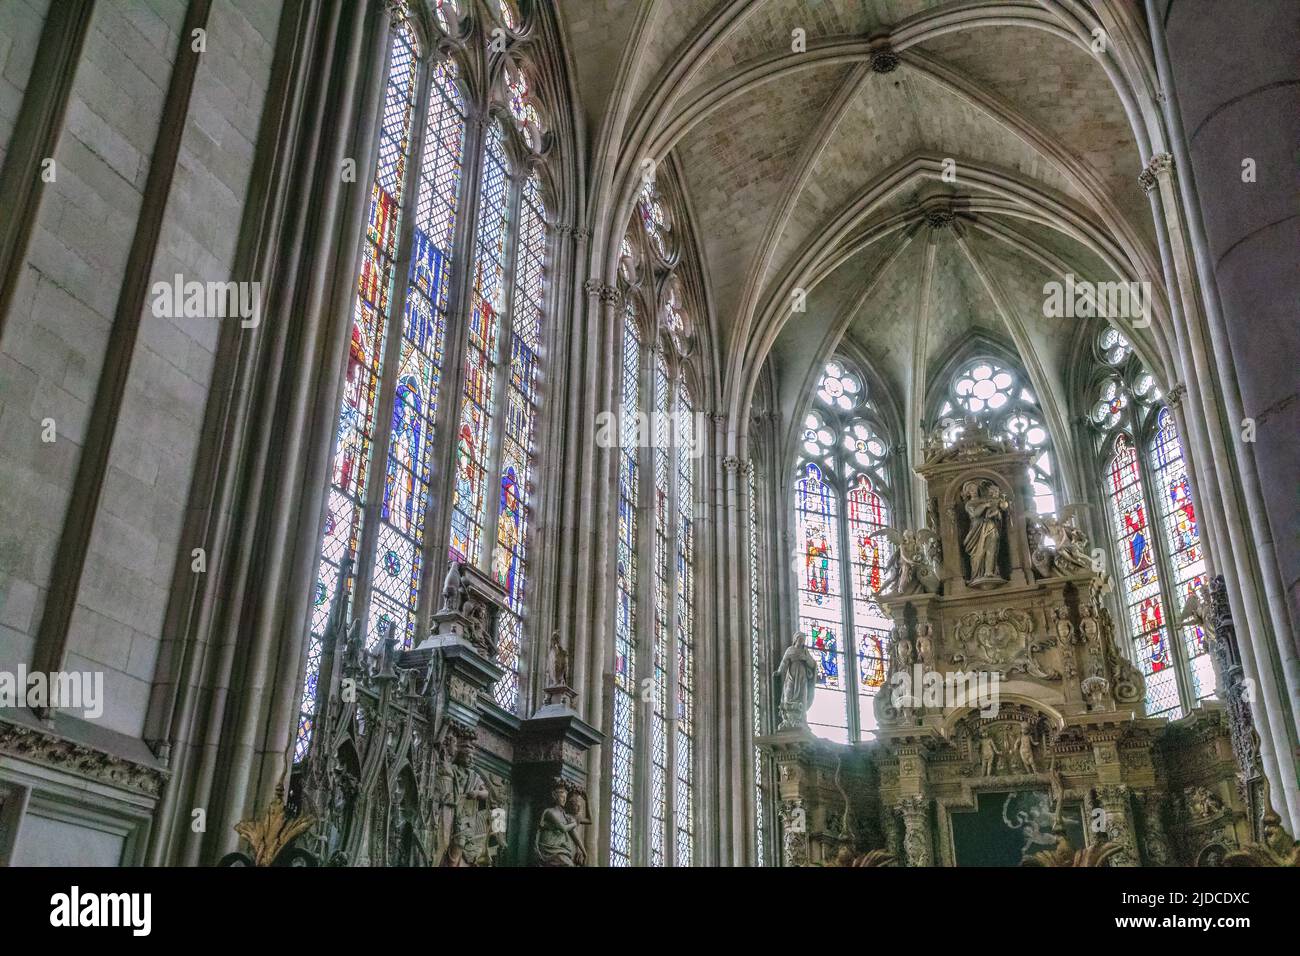 Interior of the Rouen  Cathedral in normandy, France Stock Photo